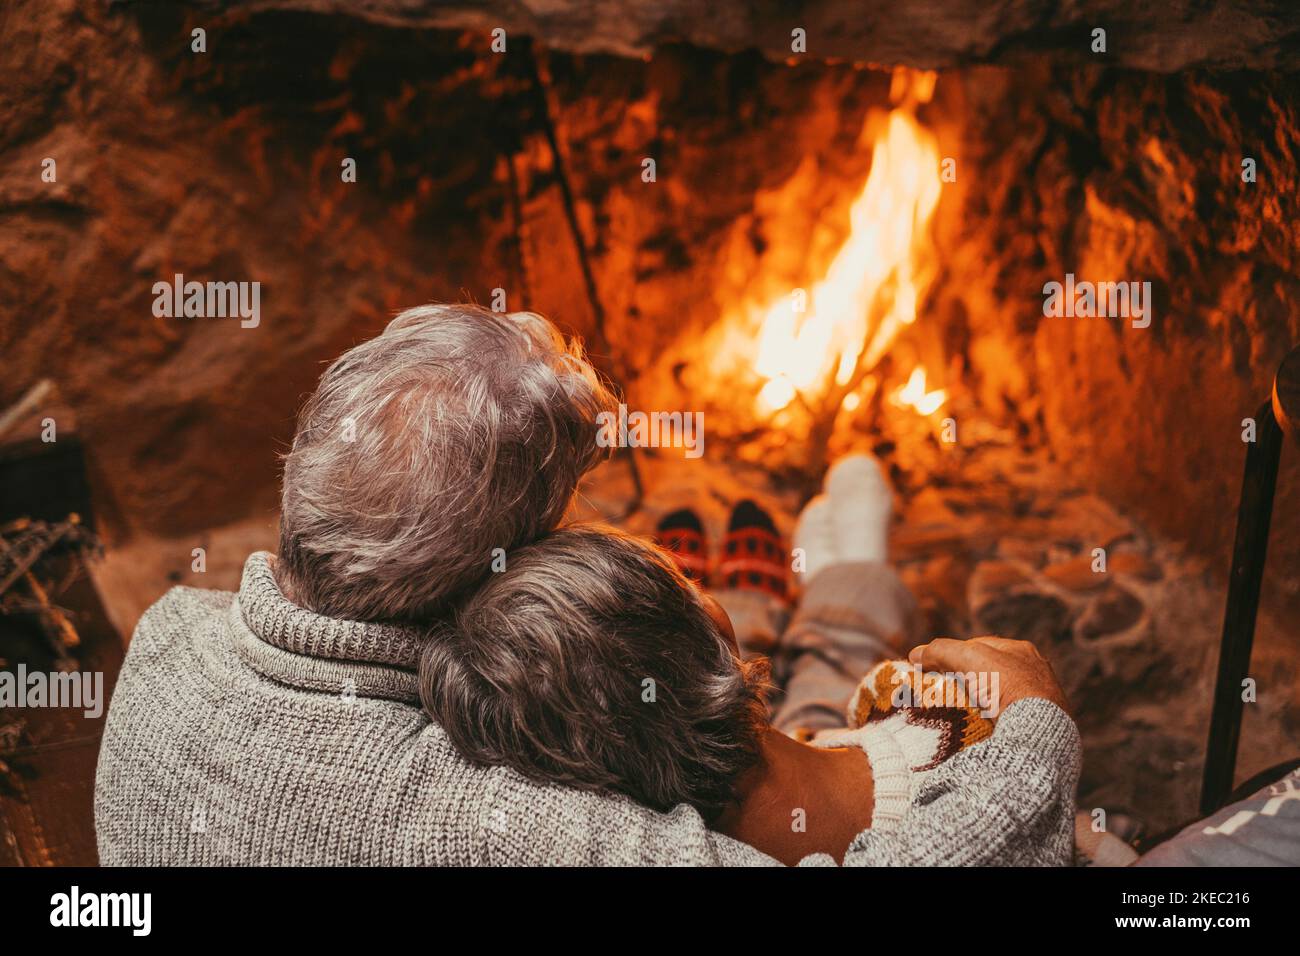 Old caucasian couple spending leisure time together at home. Back of romantic senior husband embracing with wife while relaxing and looking at burning lit fireplace during winter holiday Stock Photo